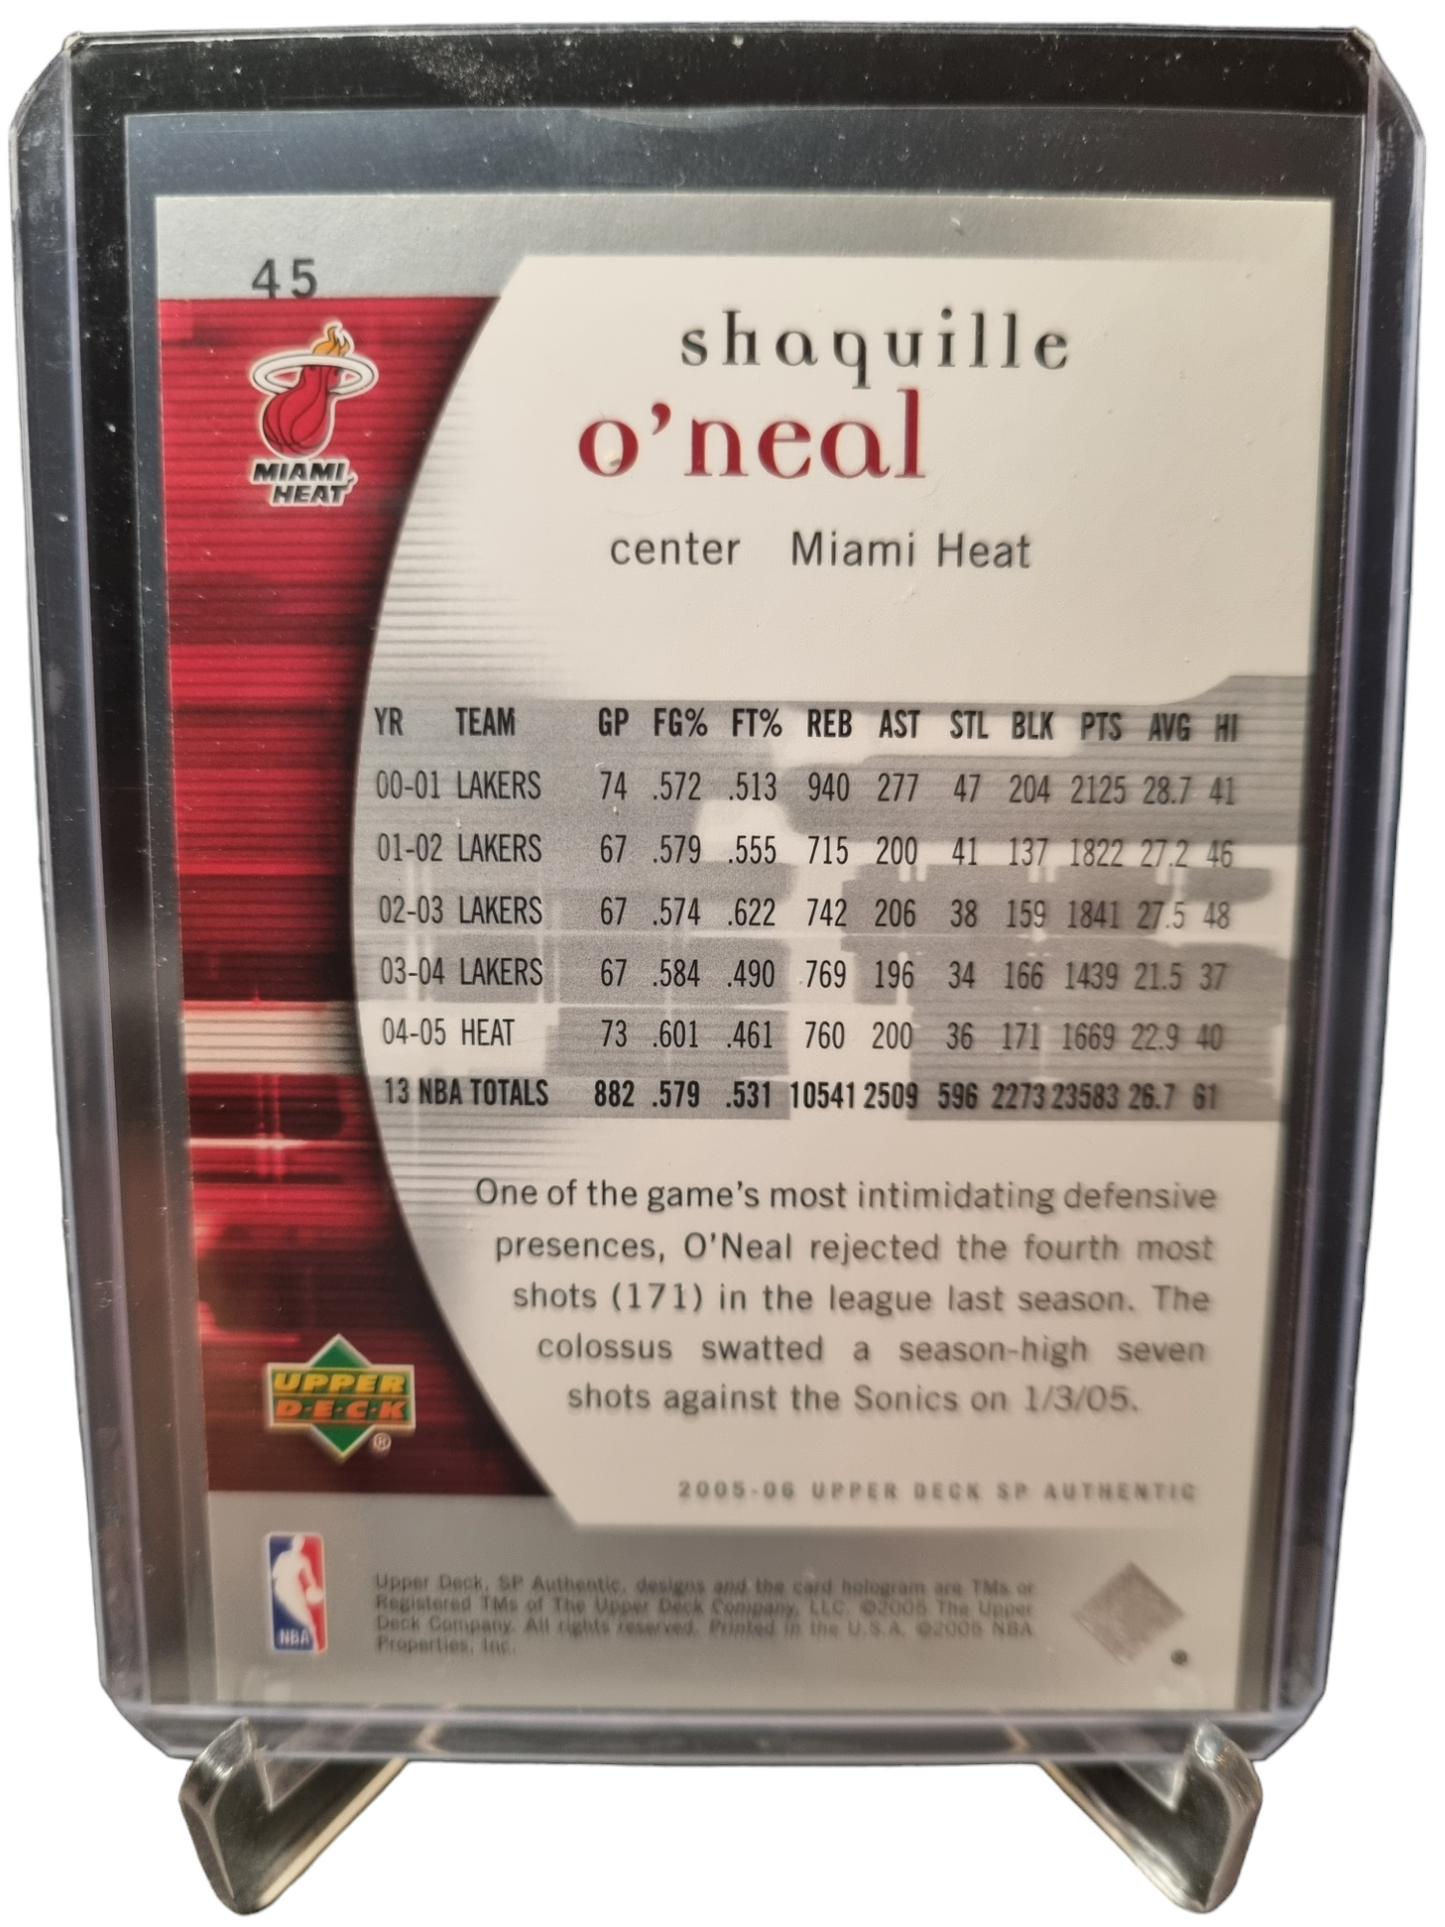 2005 Upper Deck #45 Shaquille O'Neal SP Authentic